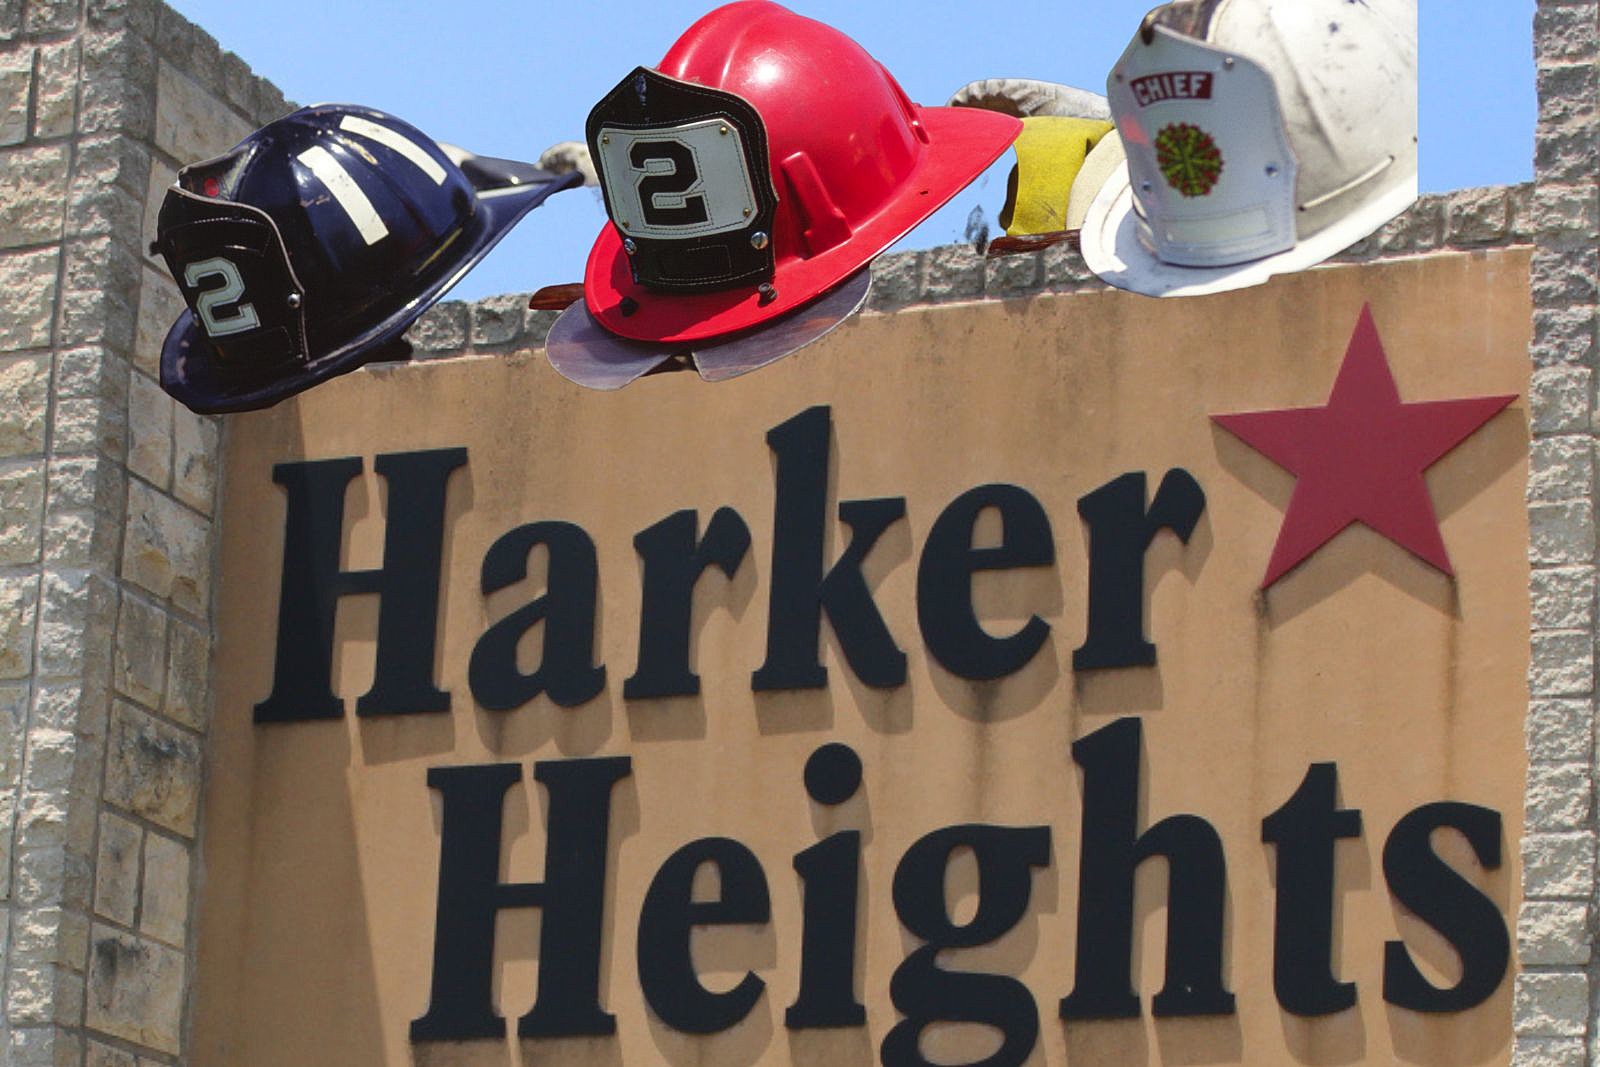 Yes! Dallas Cowboy Fans Get Ready To Party In Harker Heights